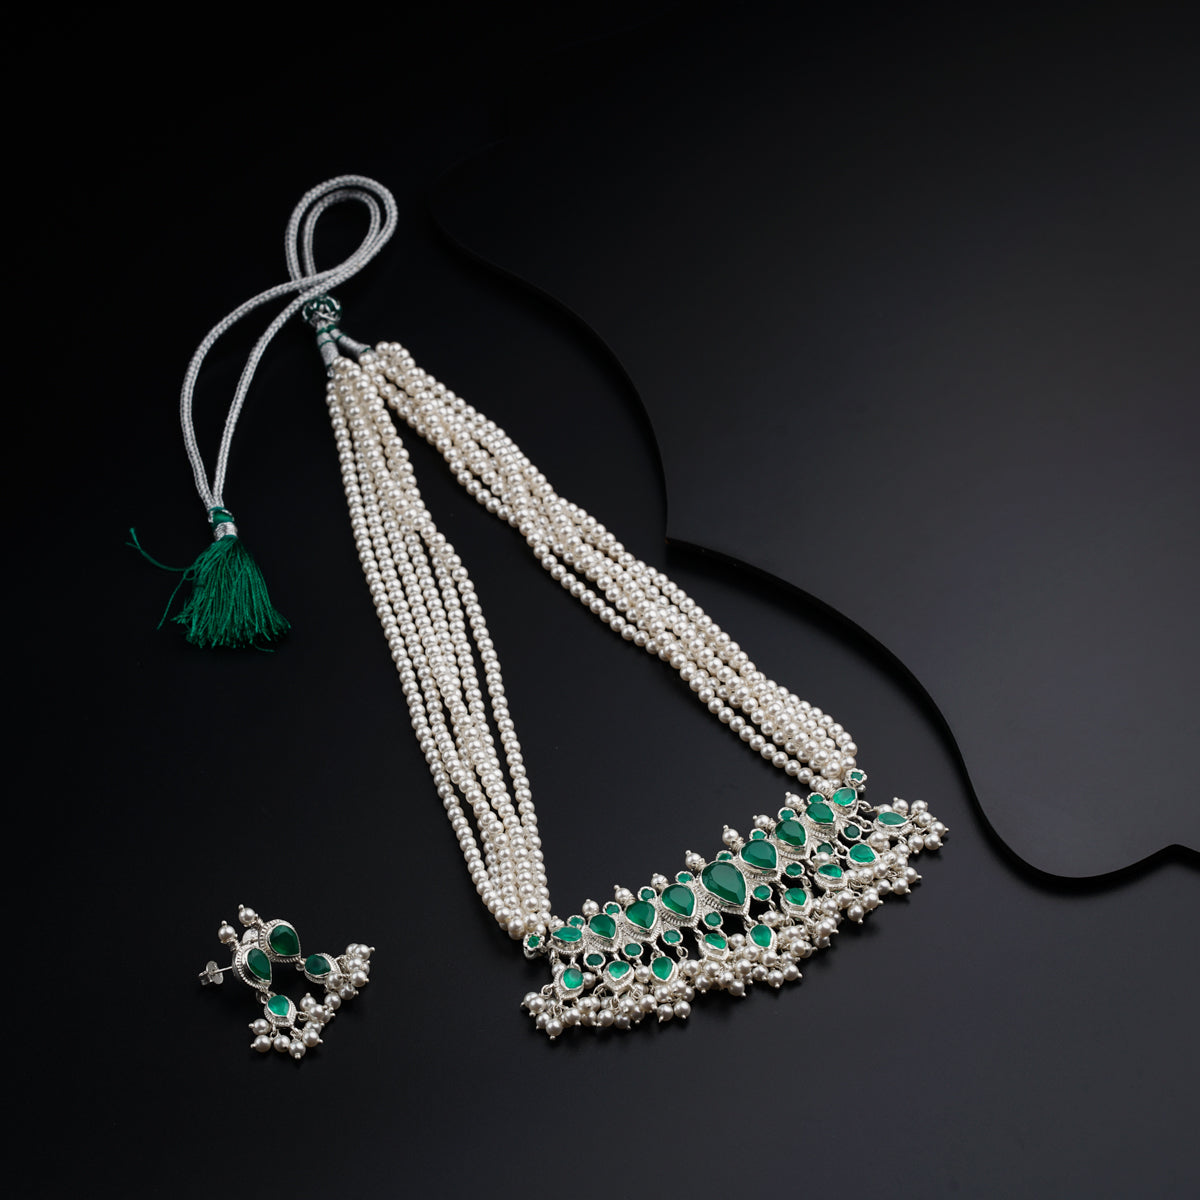 a necklace and earring with pearls and emeralds